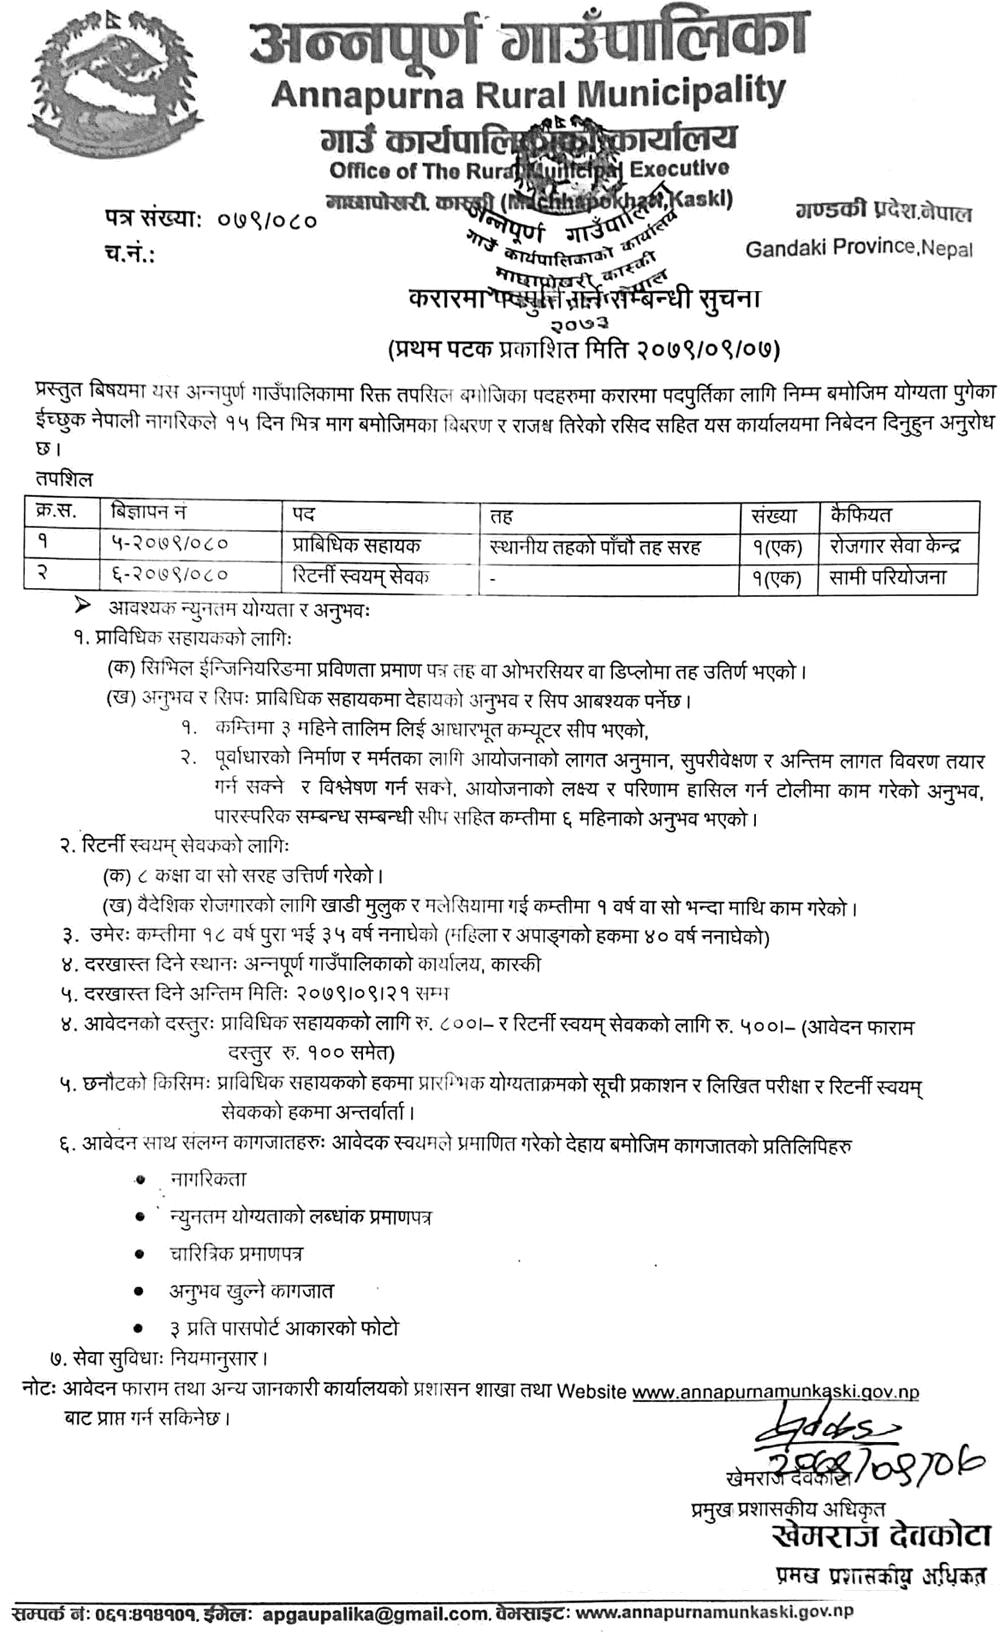 Annapurna Rural Municipality Kaski Vacancy for Technical Assistant and Returnee Volunteer